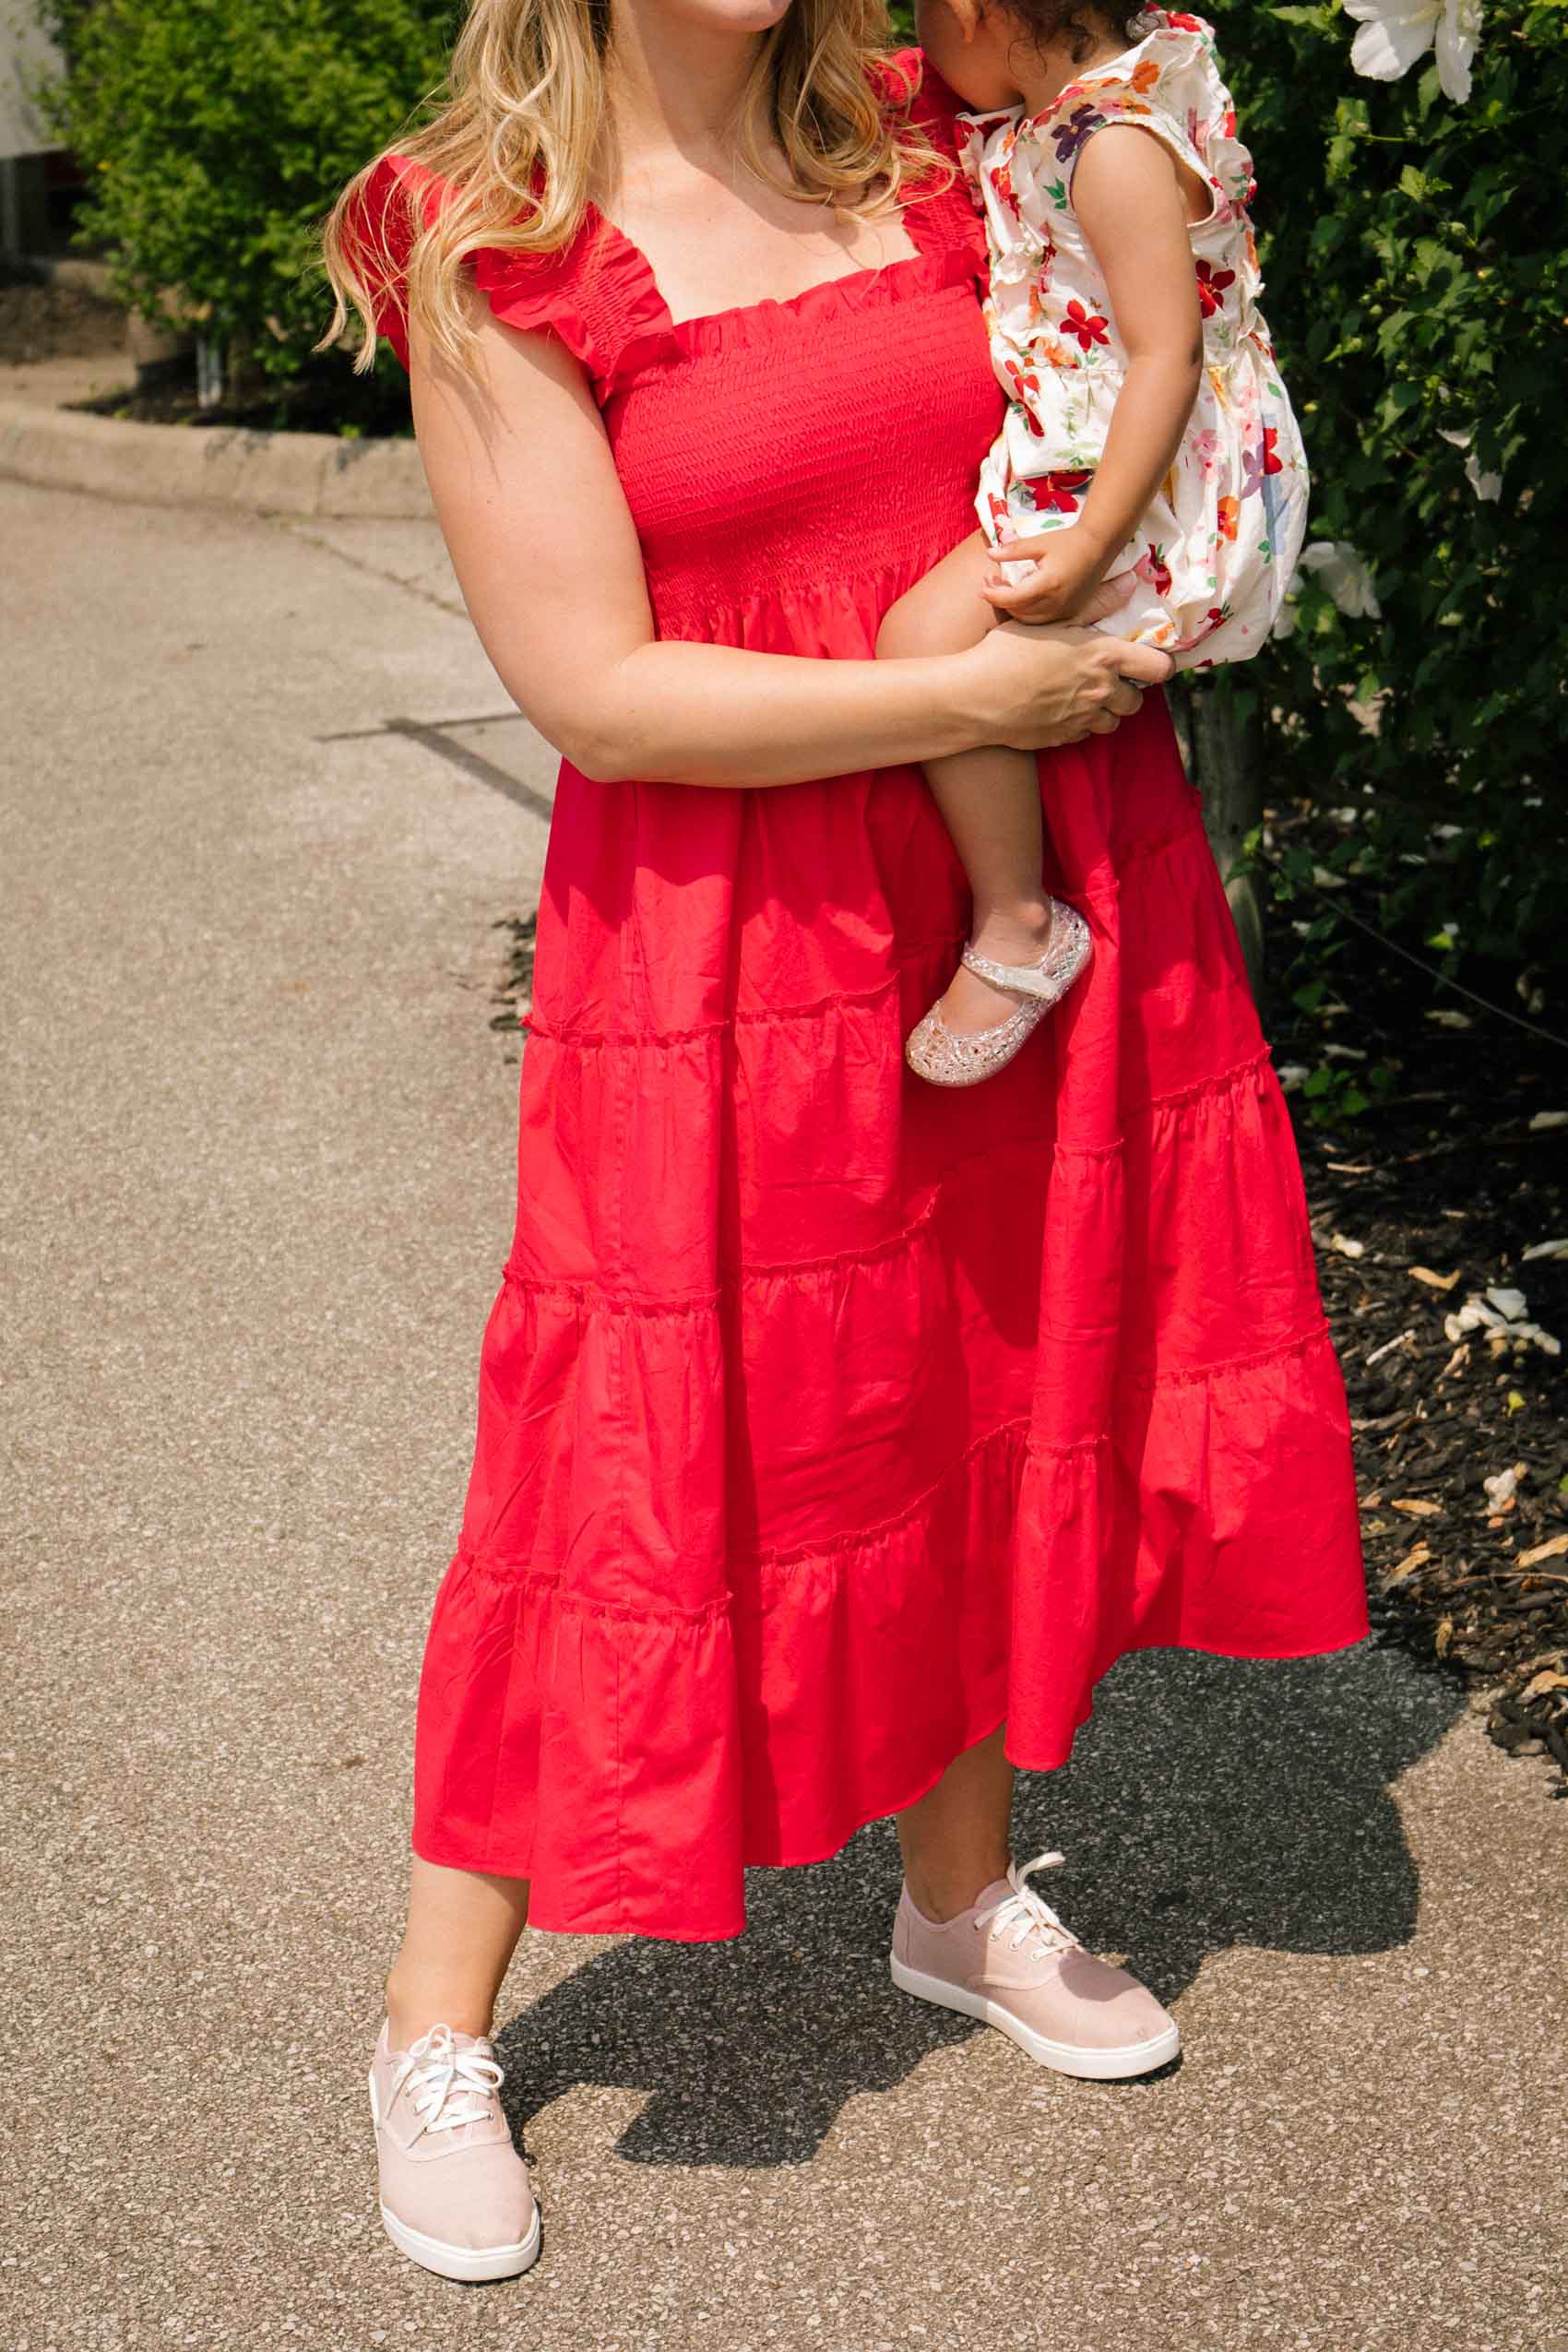 Woman wearing a red midi dress and pink sneakers while holding a toddler